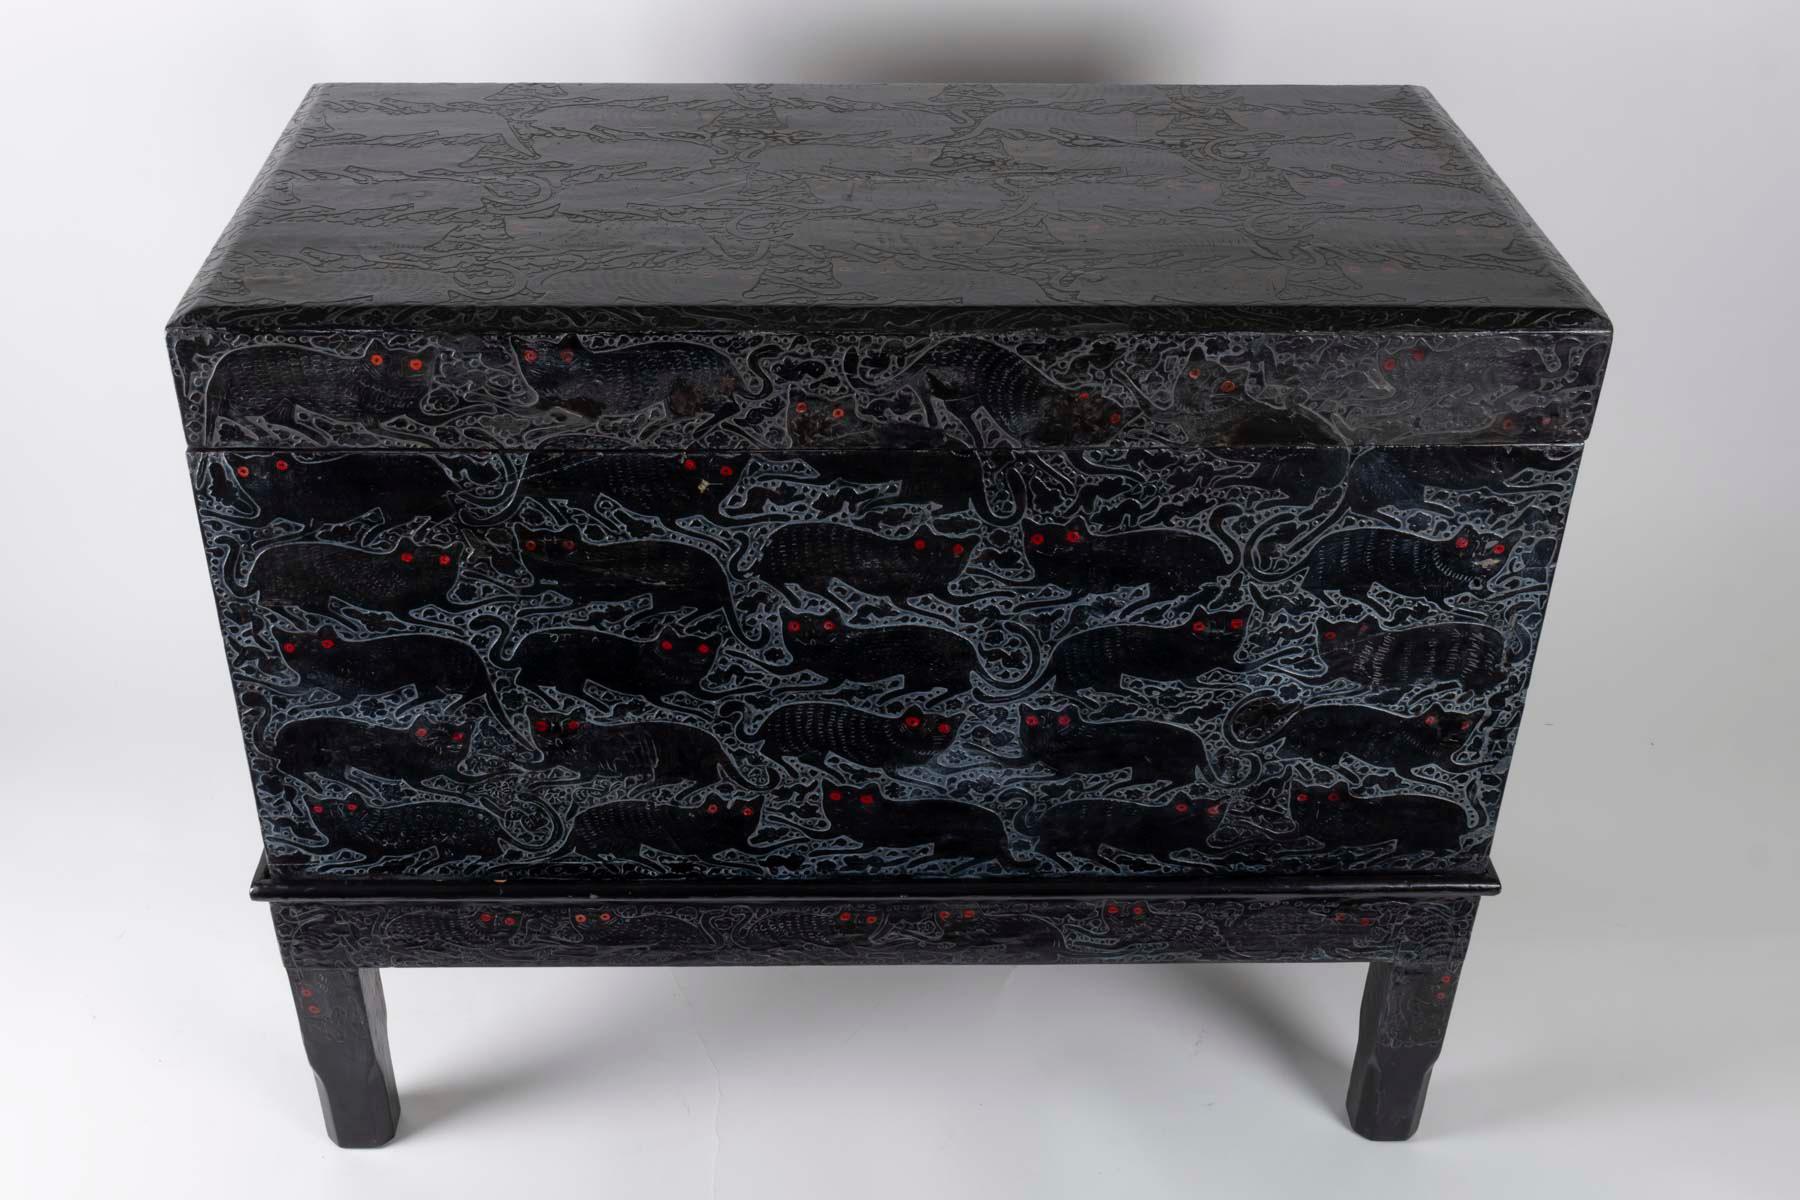 Chest on its lacquer base, 1930, Art Deco with red eyes cat decorations
Measures: H 67cm, W 81cm, P 41cm.